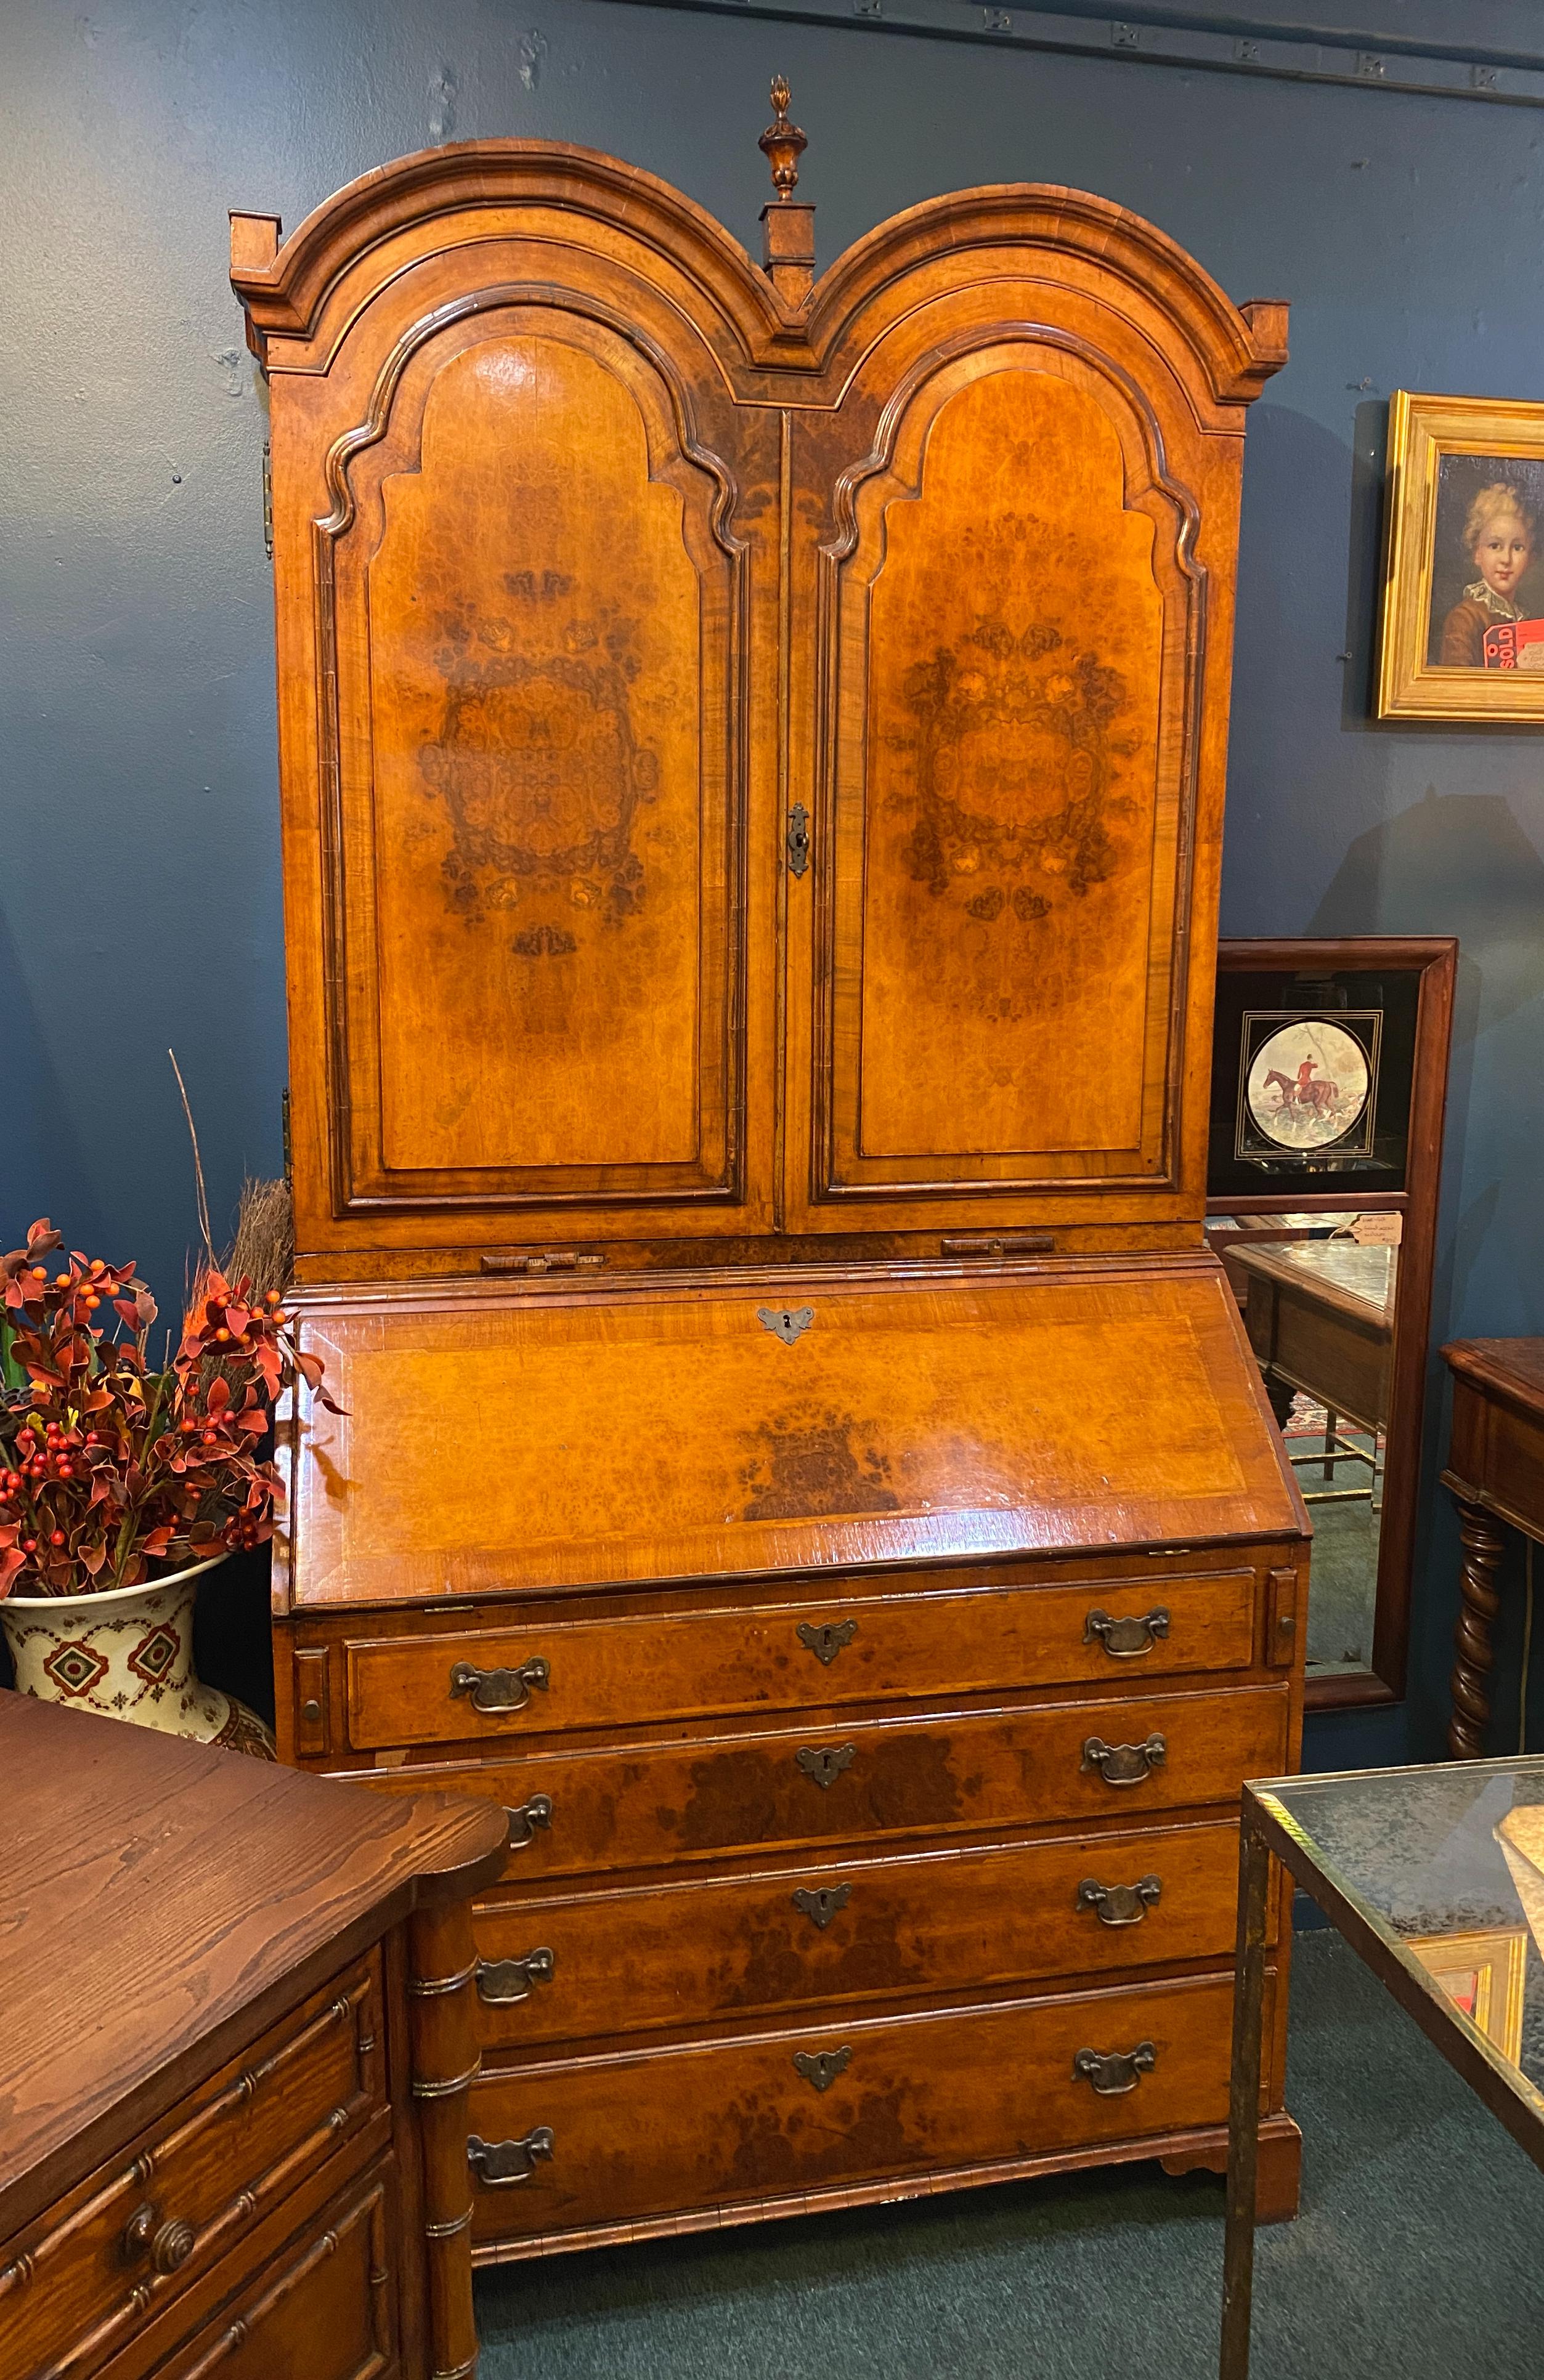 George II style Inlaid Burl walnut slant front bureau bookcase. Molded double dome cornice above a case fitted with doors over a slant front and a case fitted with four drawers on bracket feet
Measures: 84.5